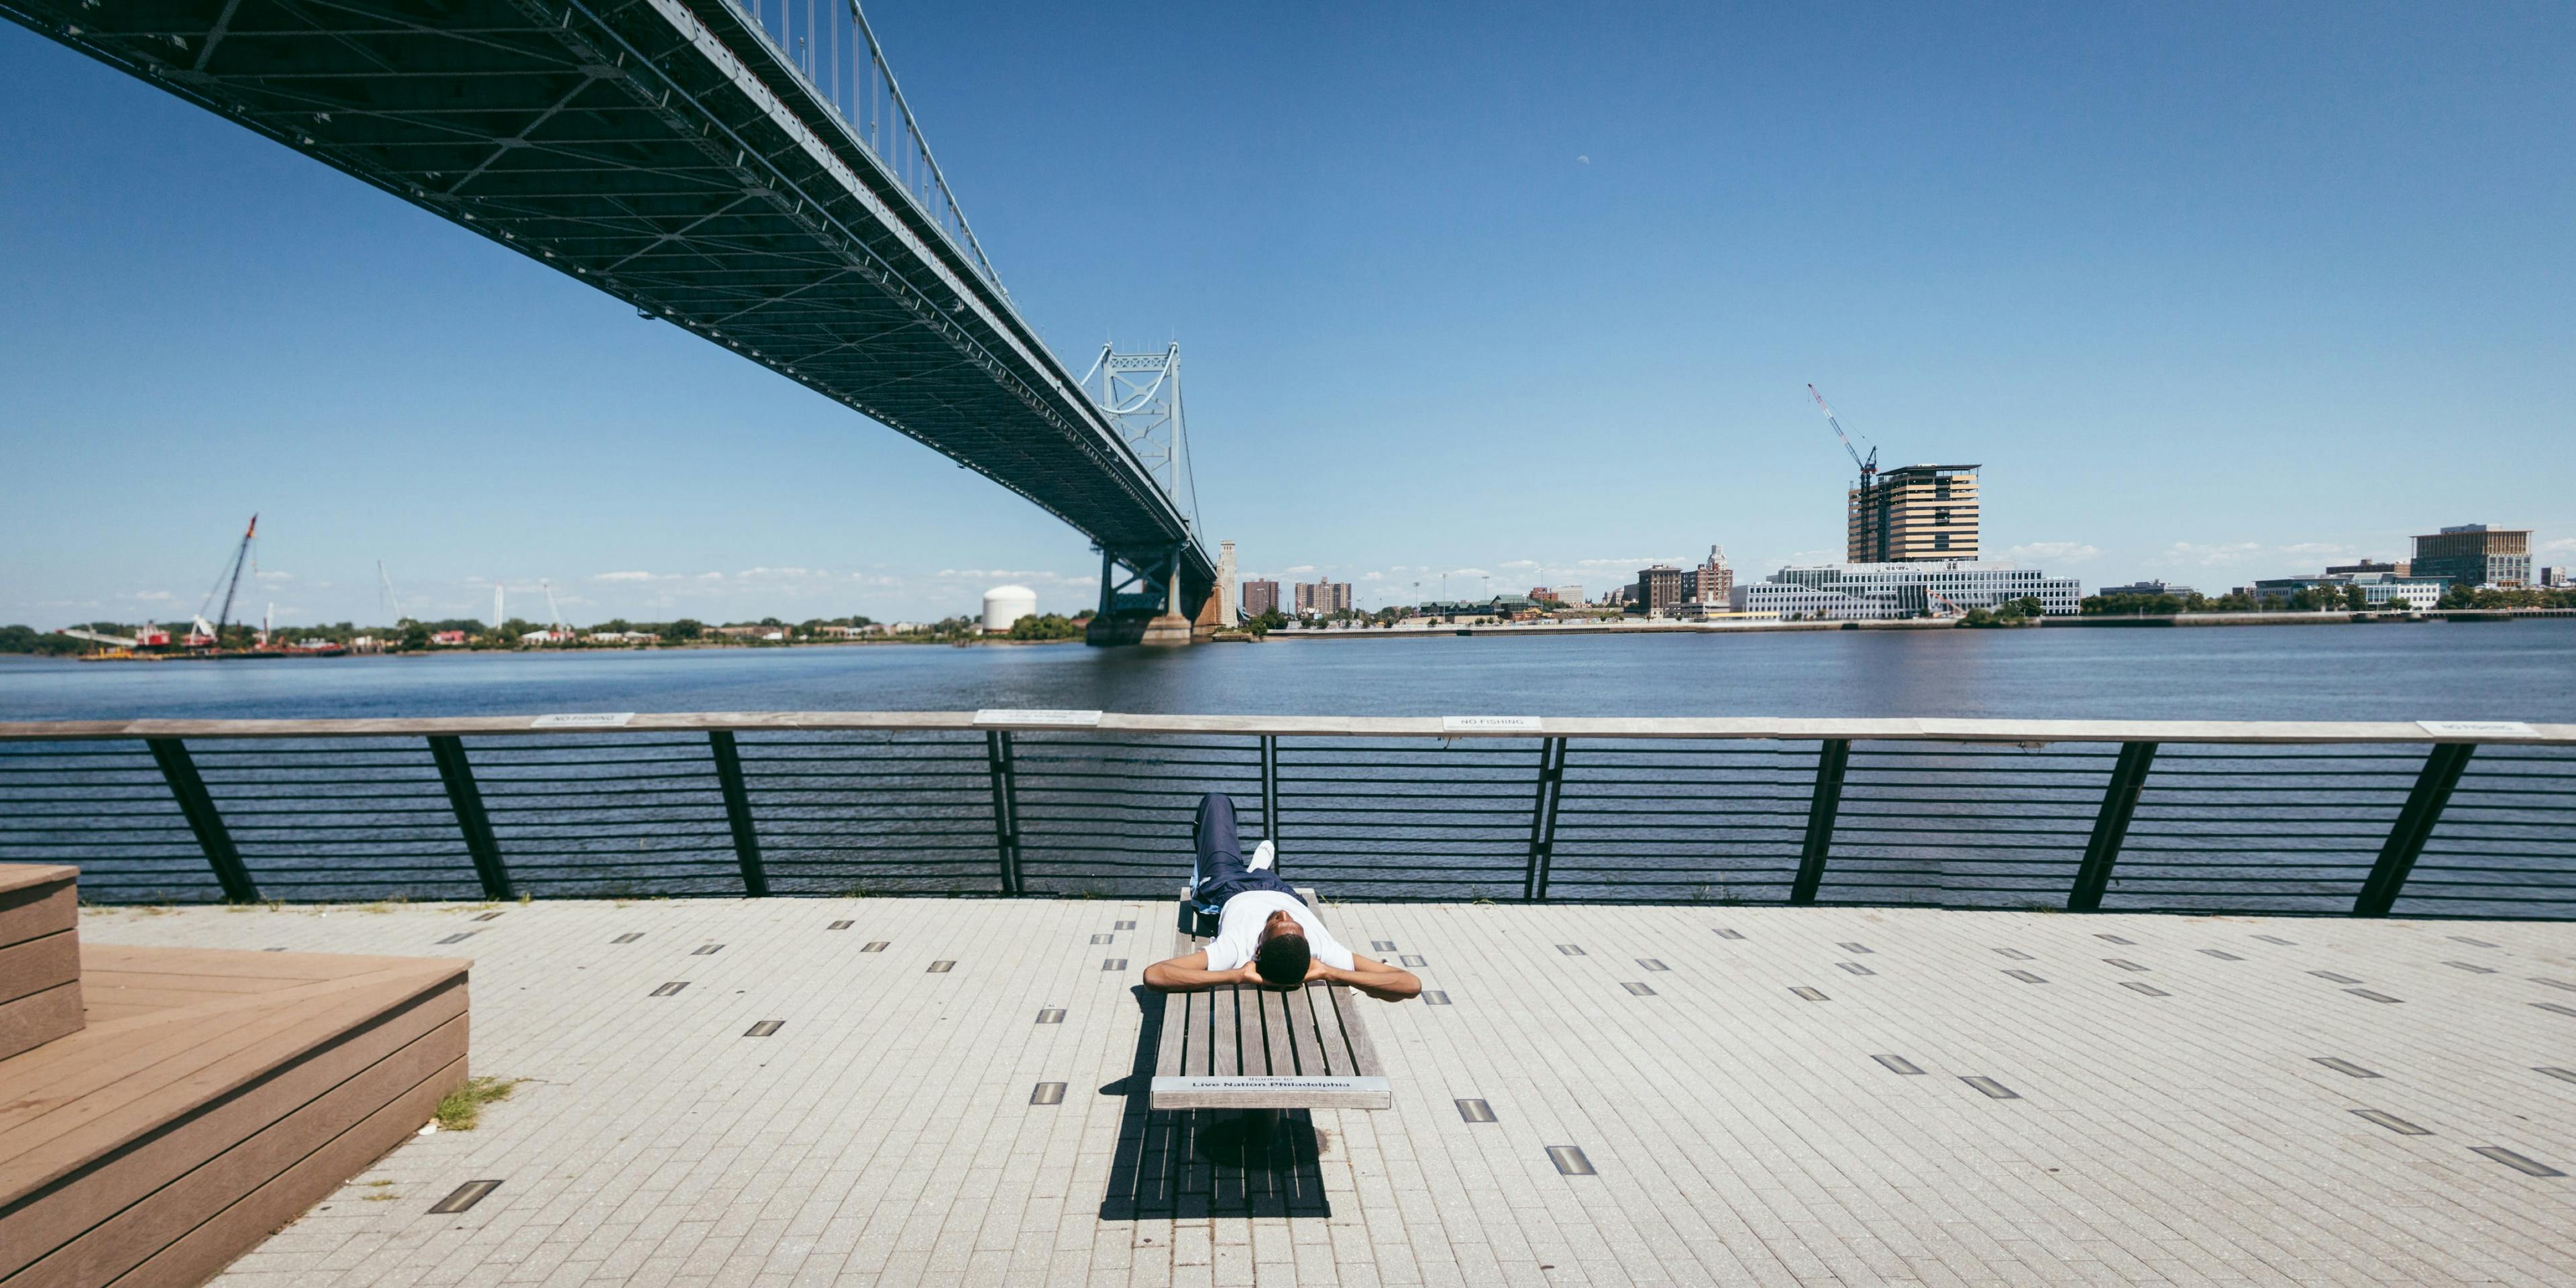 Man laying down on a bench on the Race St Pier in Philadelphia. View looking at the Delaware River.